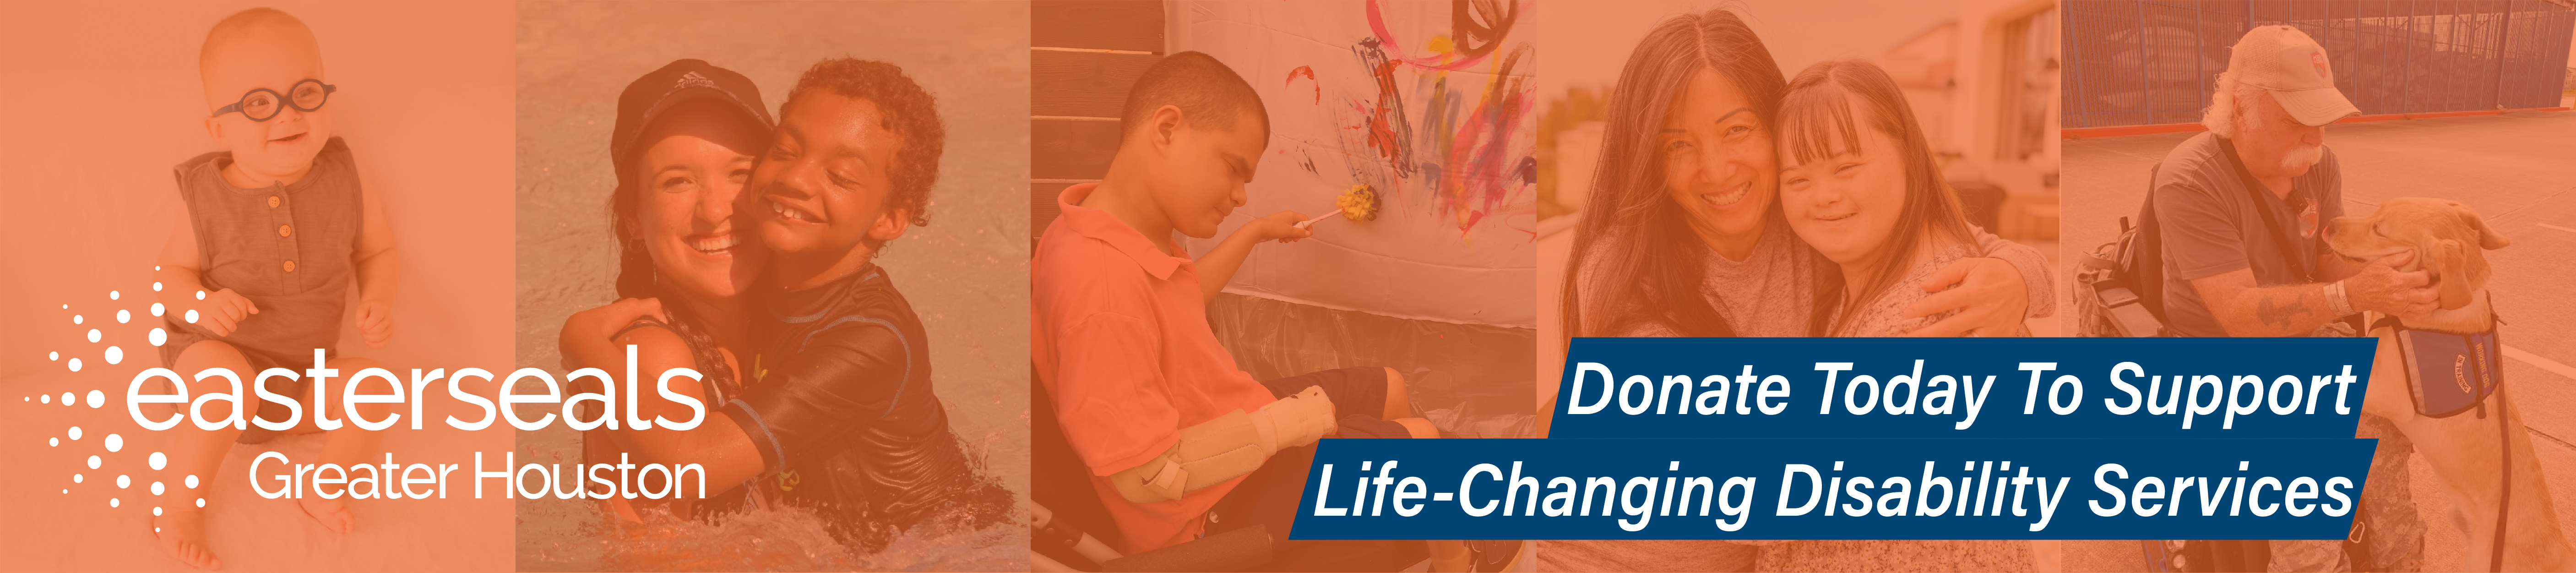 Donate to support life-changing disability services